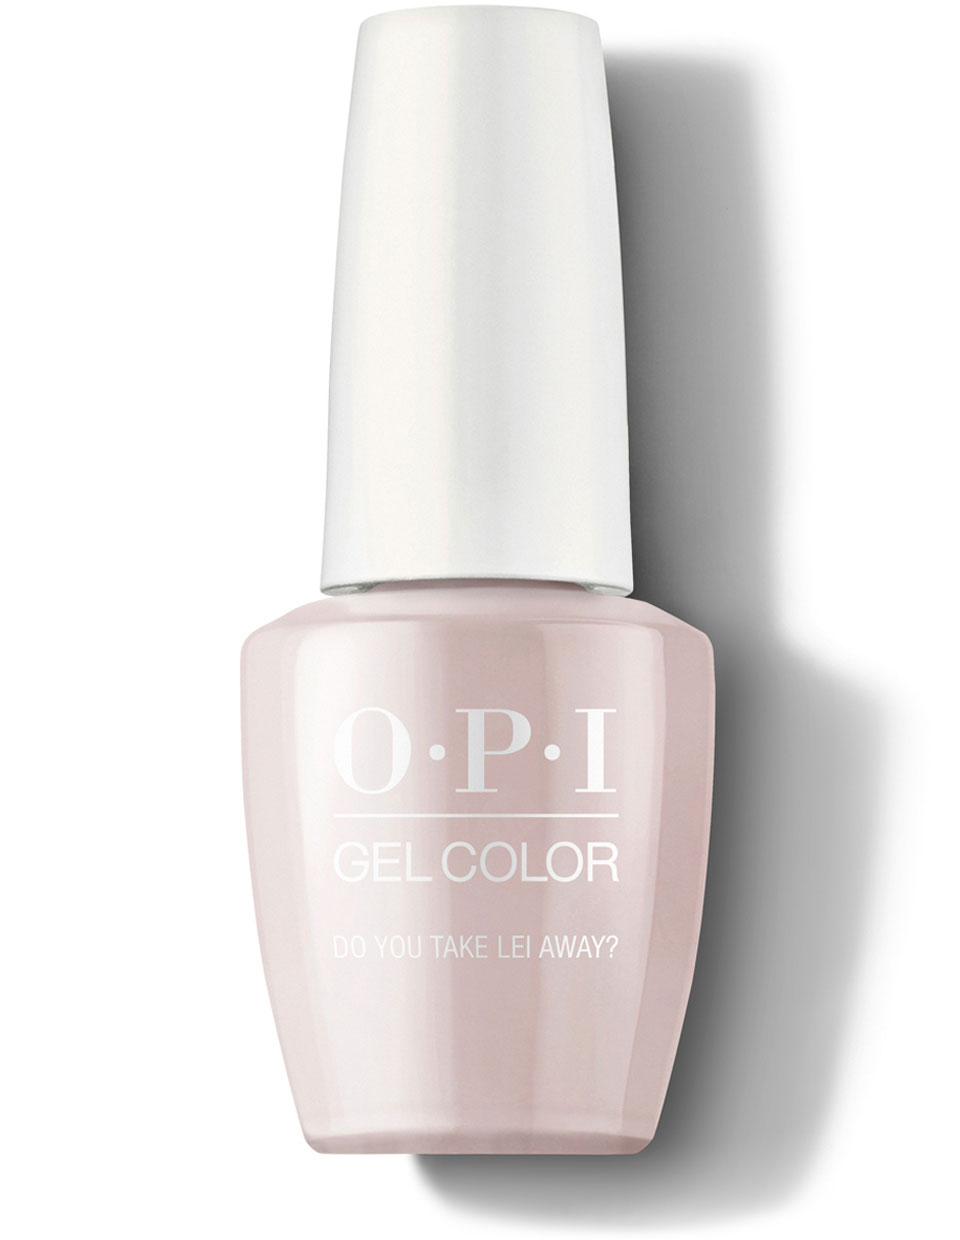 Writing Spice Models Opi Nude Gel Colors